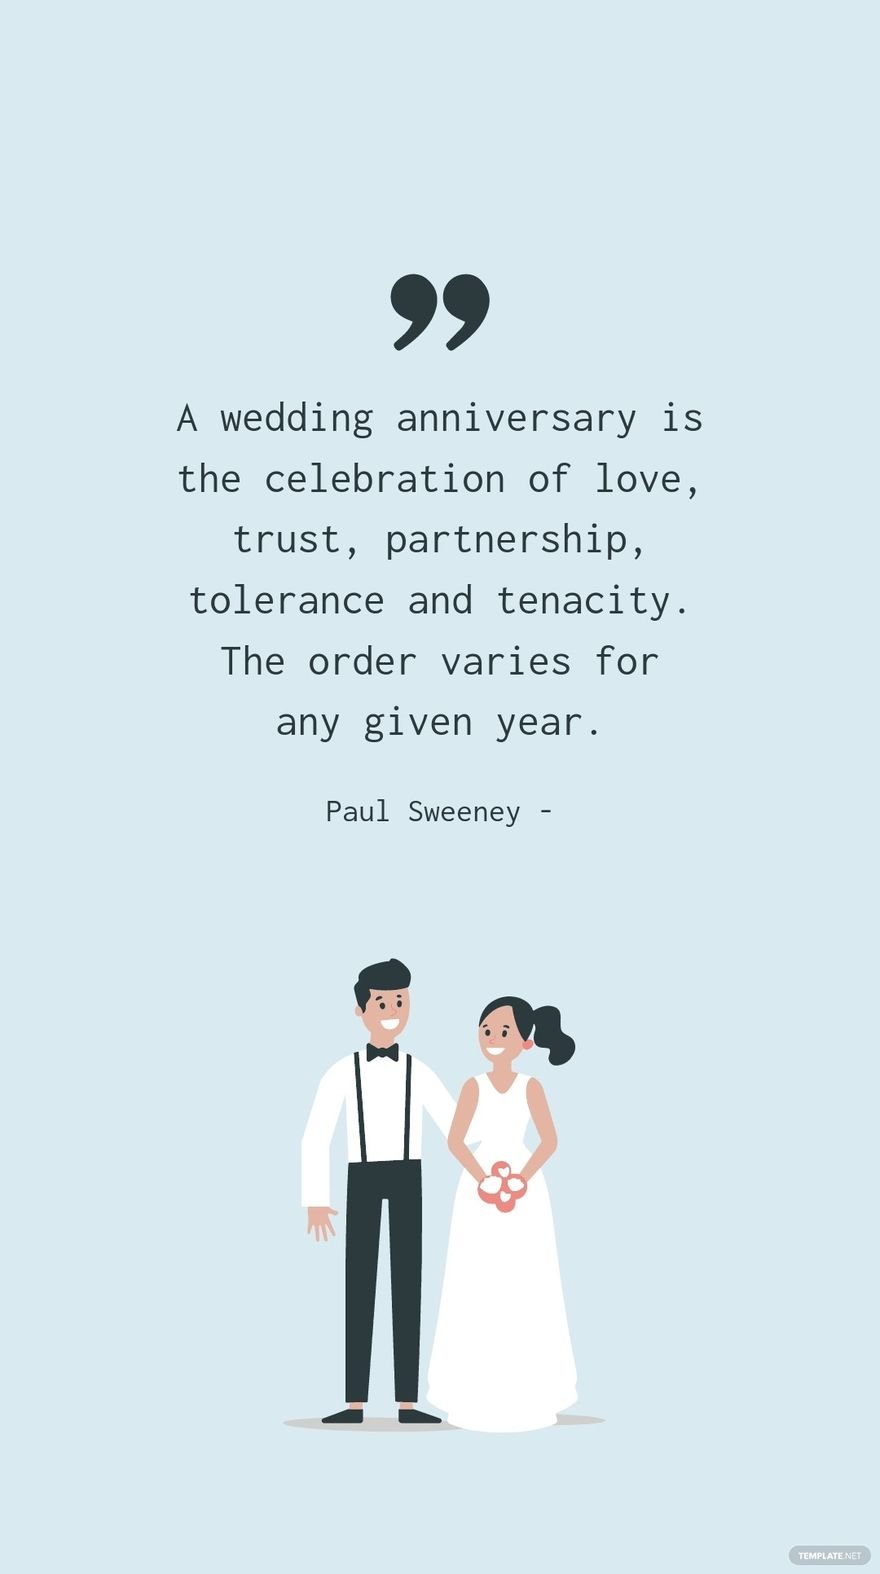 Free Paul Sweeney - A wedding anniversary is the celebration of love, trust, partnership, tolerance and tenacity. The order varies for any given year.